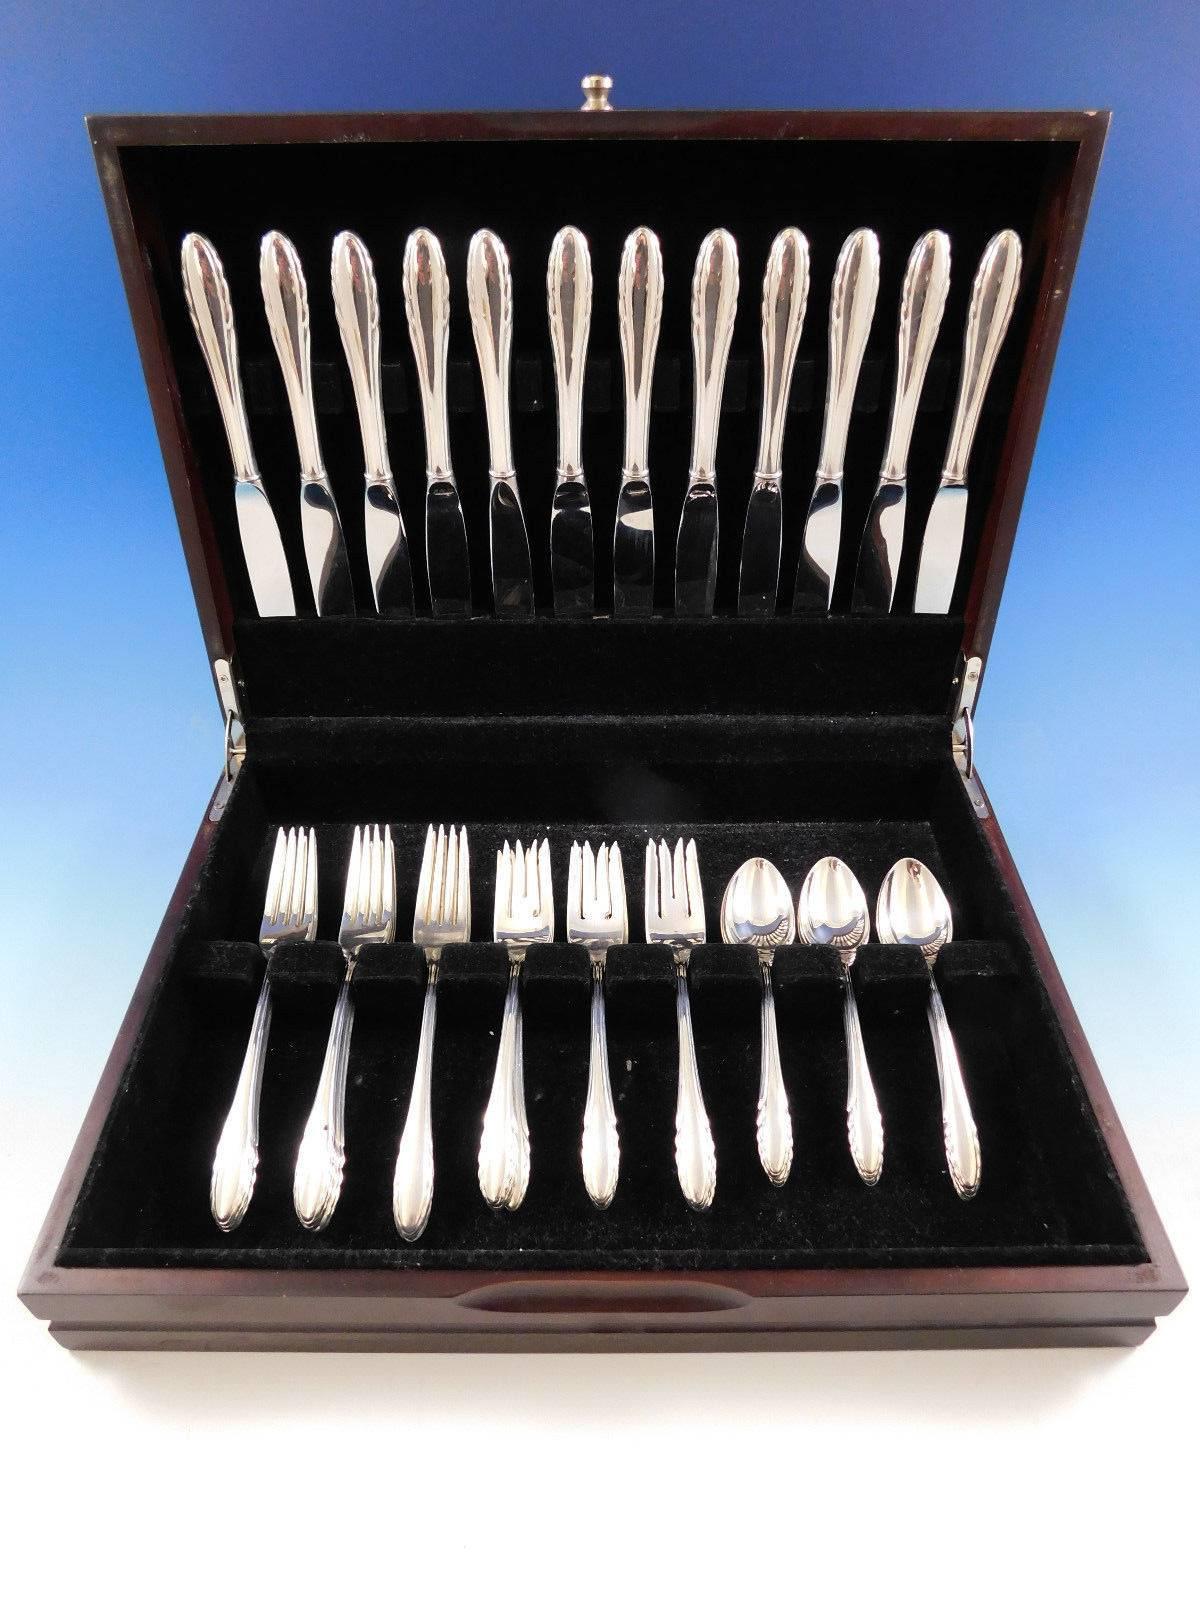 Lyric by Gorham sterling silver flatware set, 48 pieces. This set includes:

12 knives, 8 7/8